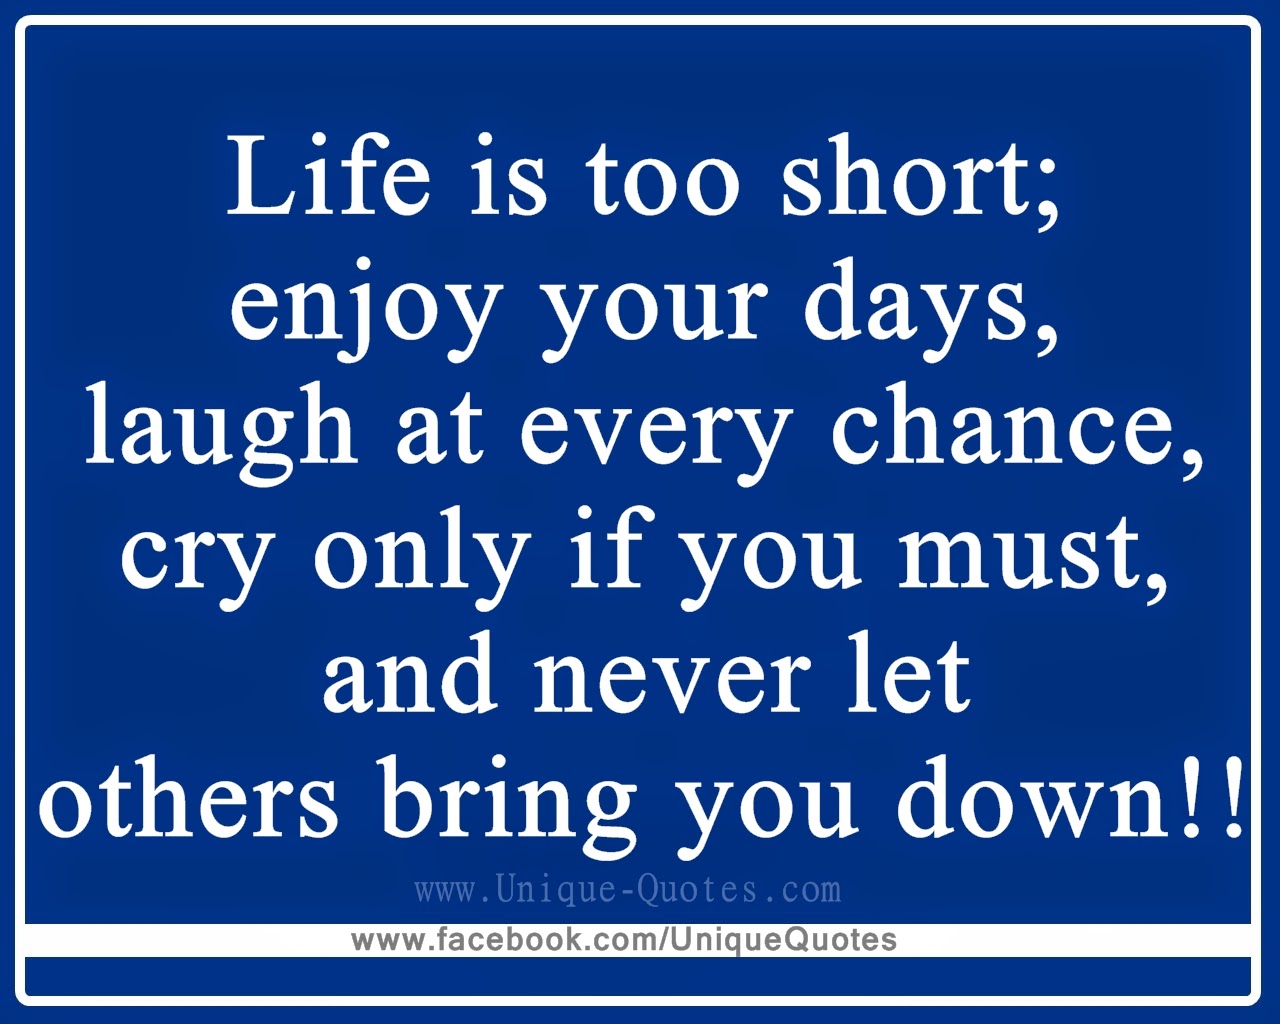 Life is too short enjoy your days laugh at every chance cry only if you must and never let others bring you down